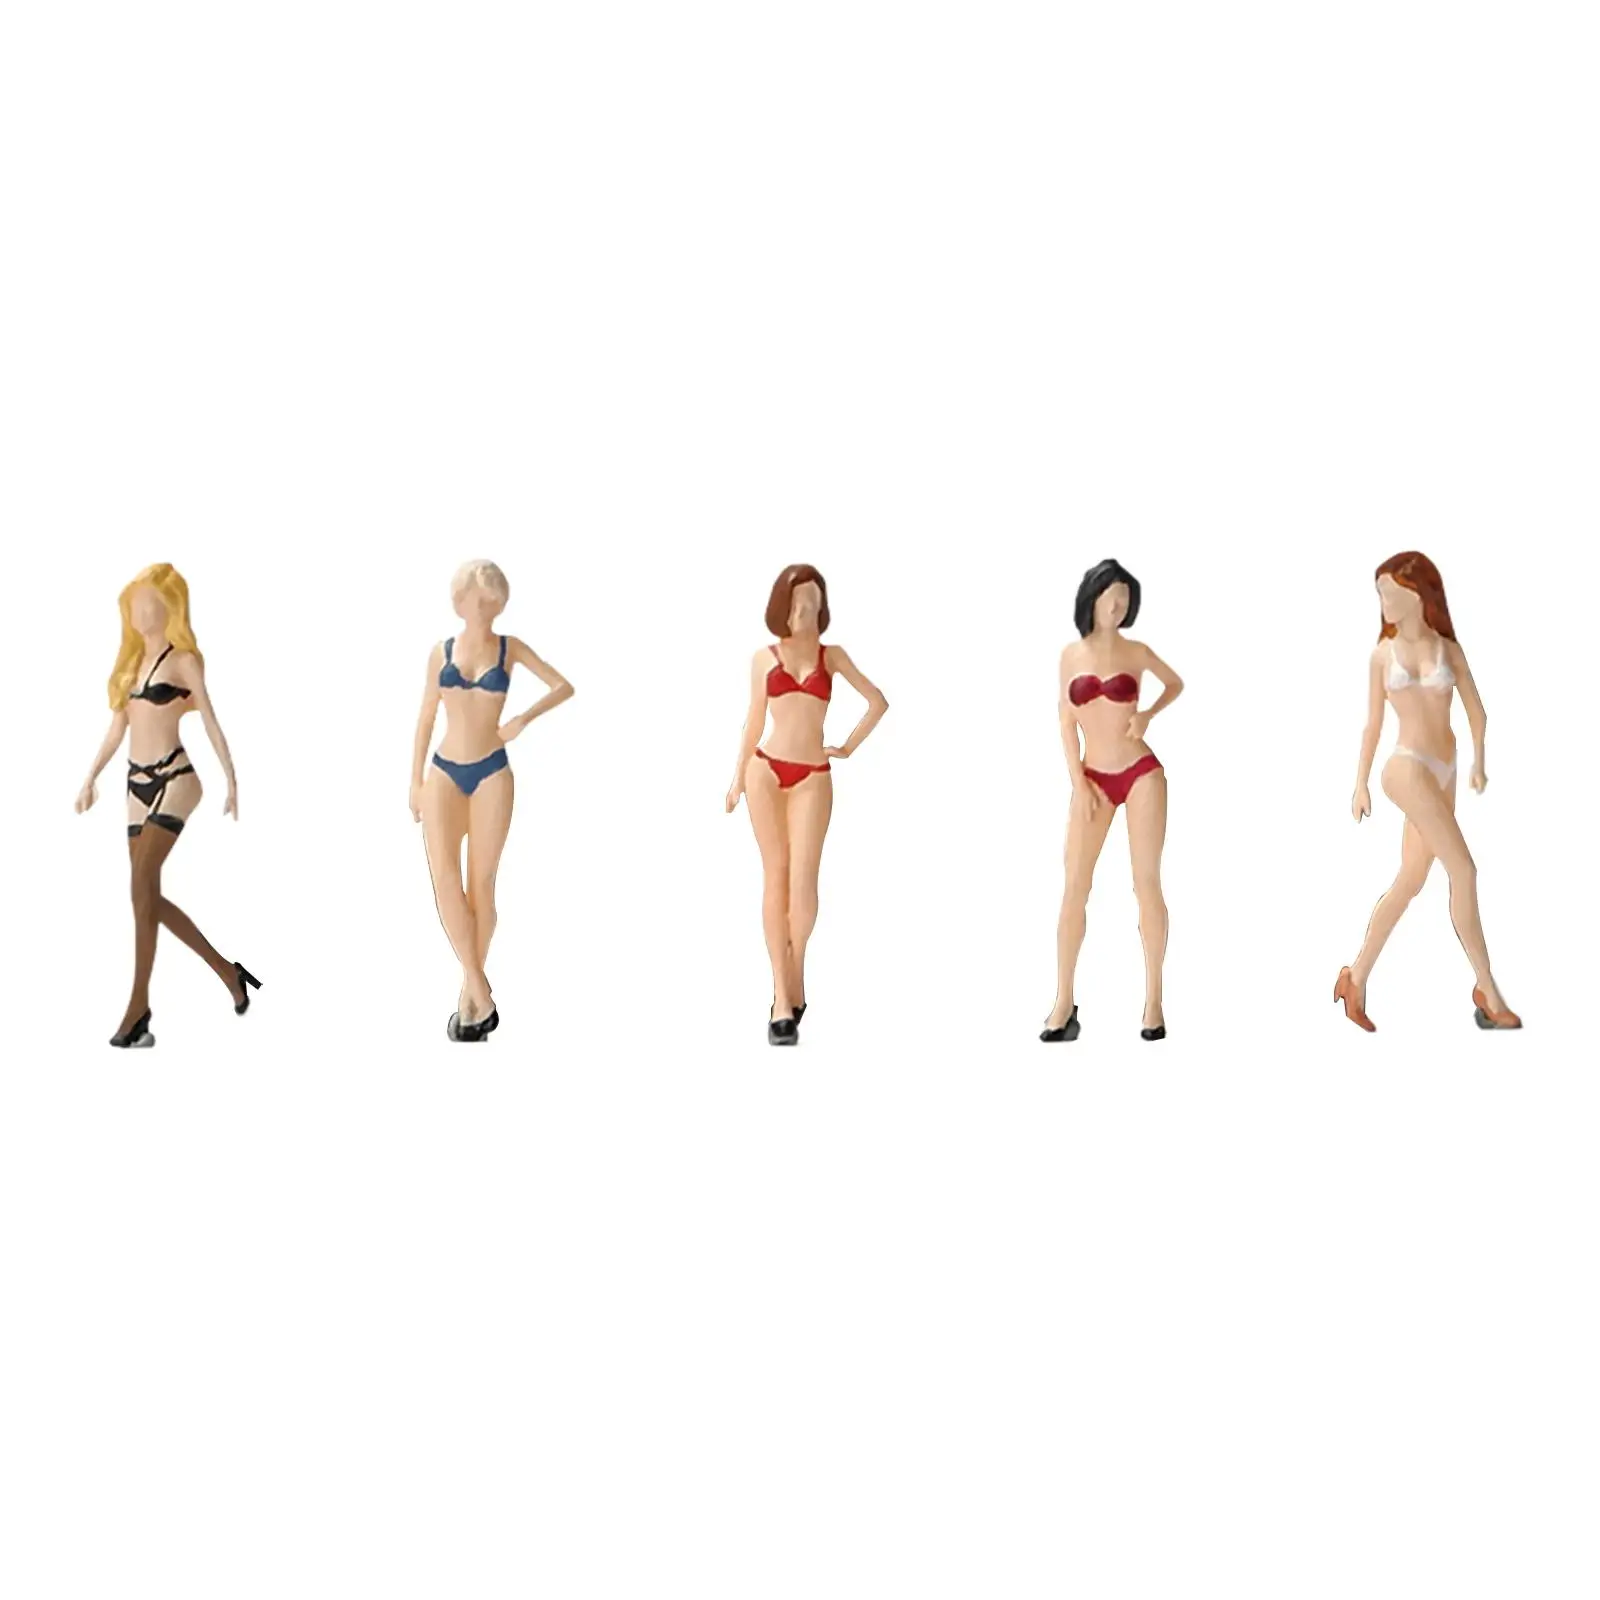 1/64 Scale Models Figurine DIY Layout Scenery Accs 1/64 Scale Model People Figures for DIY Scene Layout